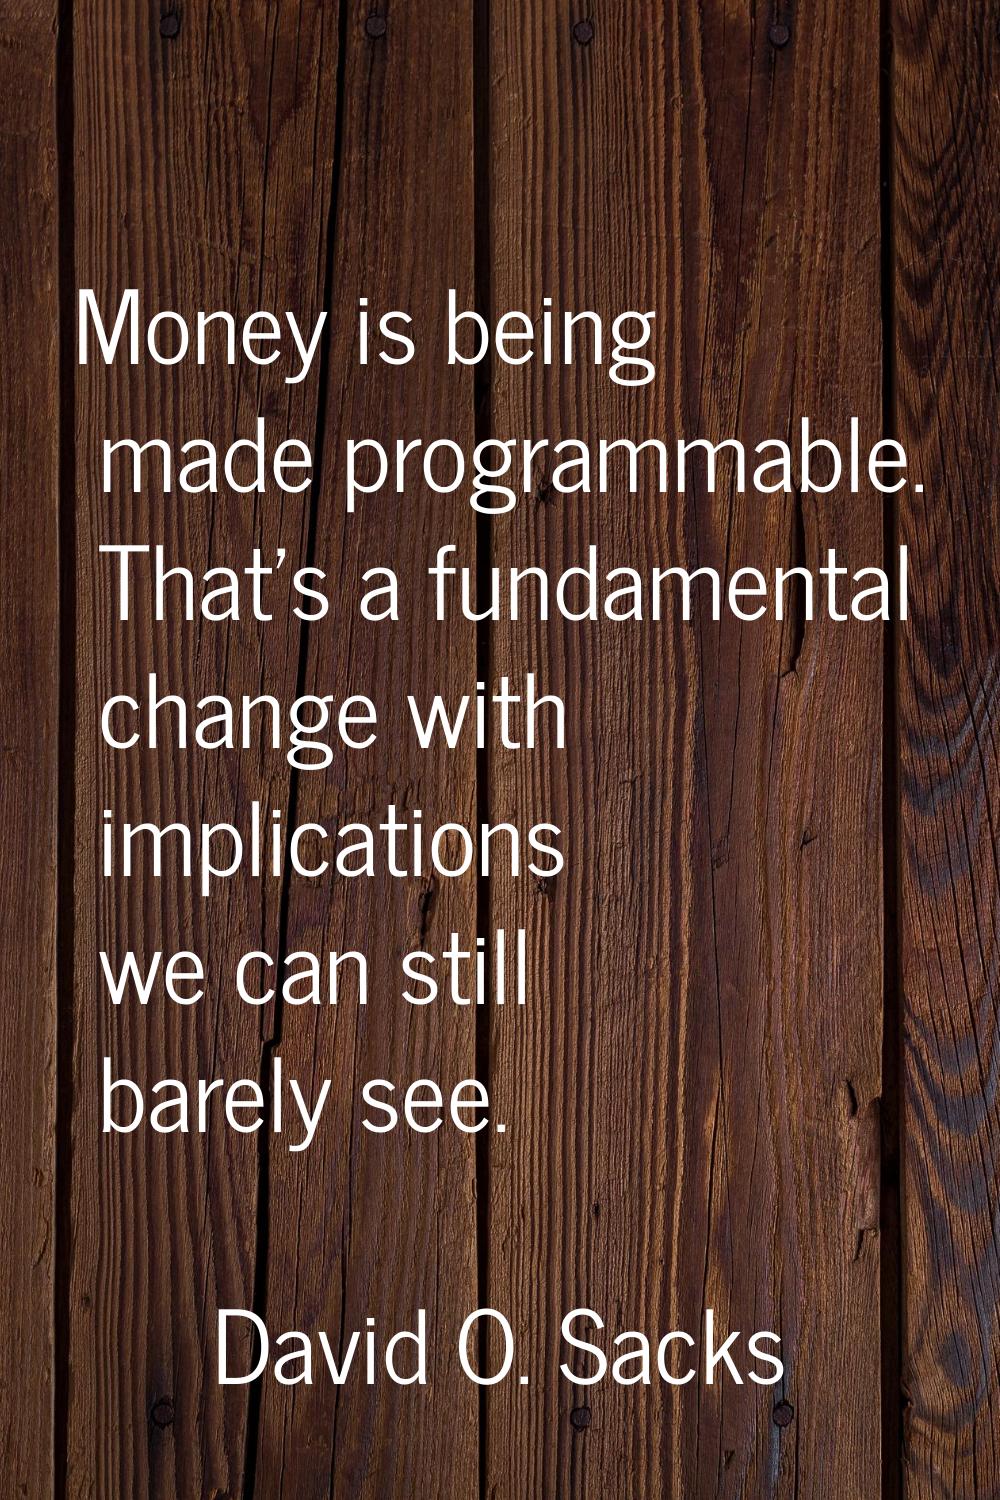 Money is being made programmable. That's a fundamental change with implications we can still barely